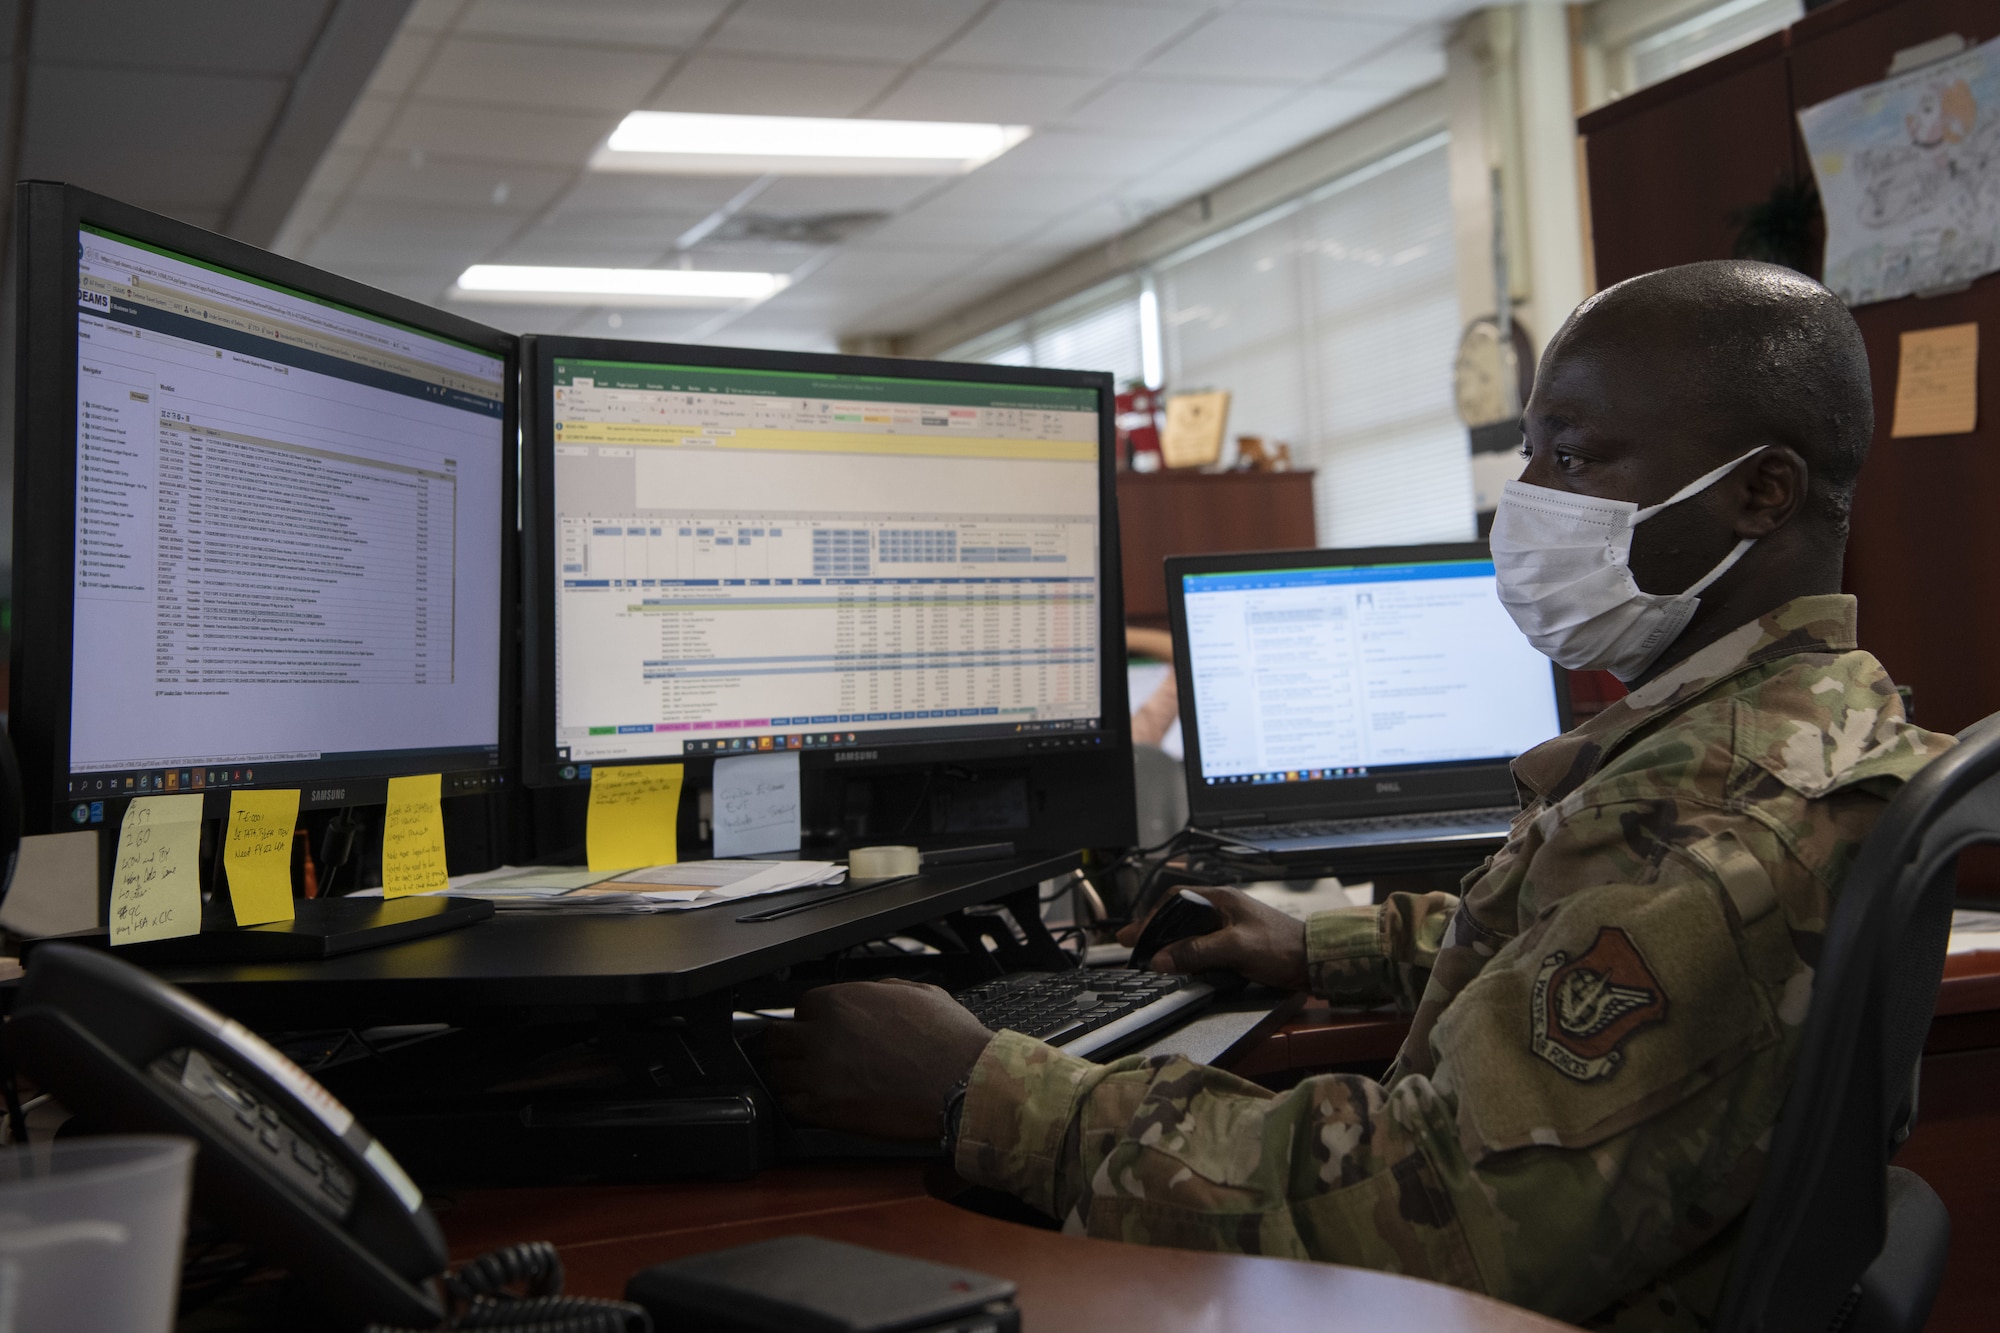 U.S. Air Force Staff Sgt. Emmanuel Agyemang Duah, 18th Comptroller Squadron travel team lead, works in the 18th CPTS financial analysis office at Kadena Air Base, Japan, May 17, 2022. The financial management office won the FY 2021 PACAF FMA of the year award. (U.S. Air Force photo by Staff Sgt. Rhett Isbell)